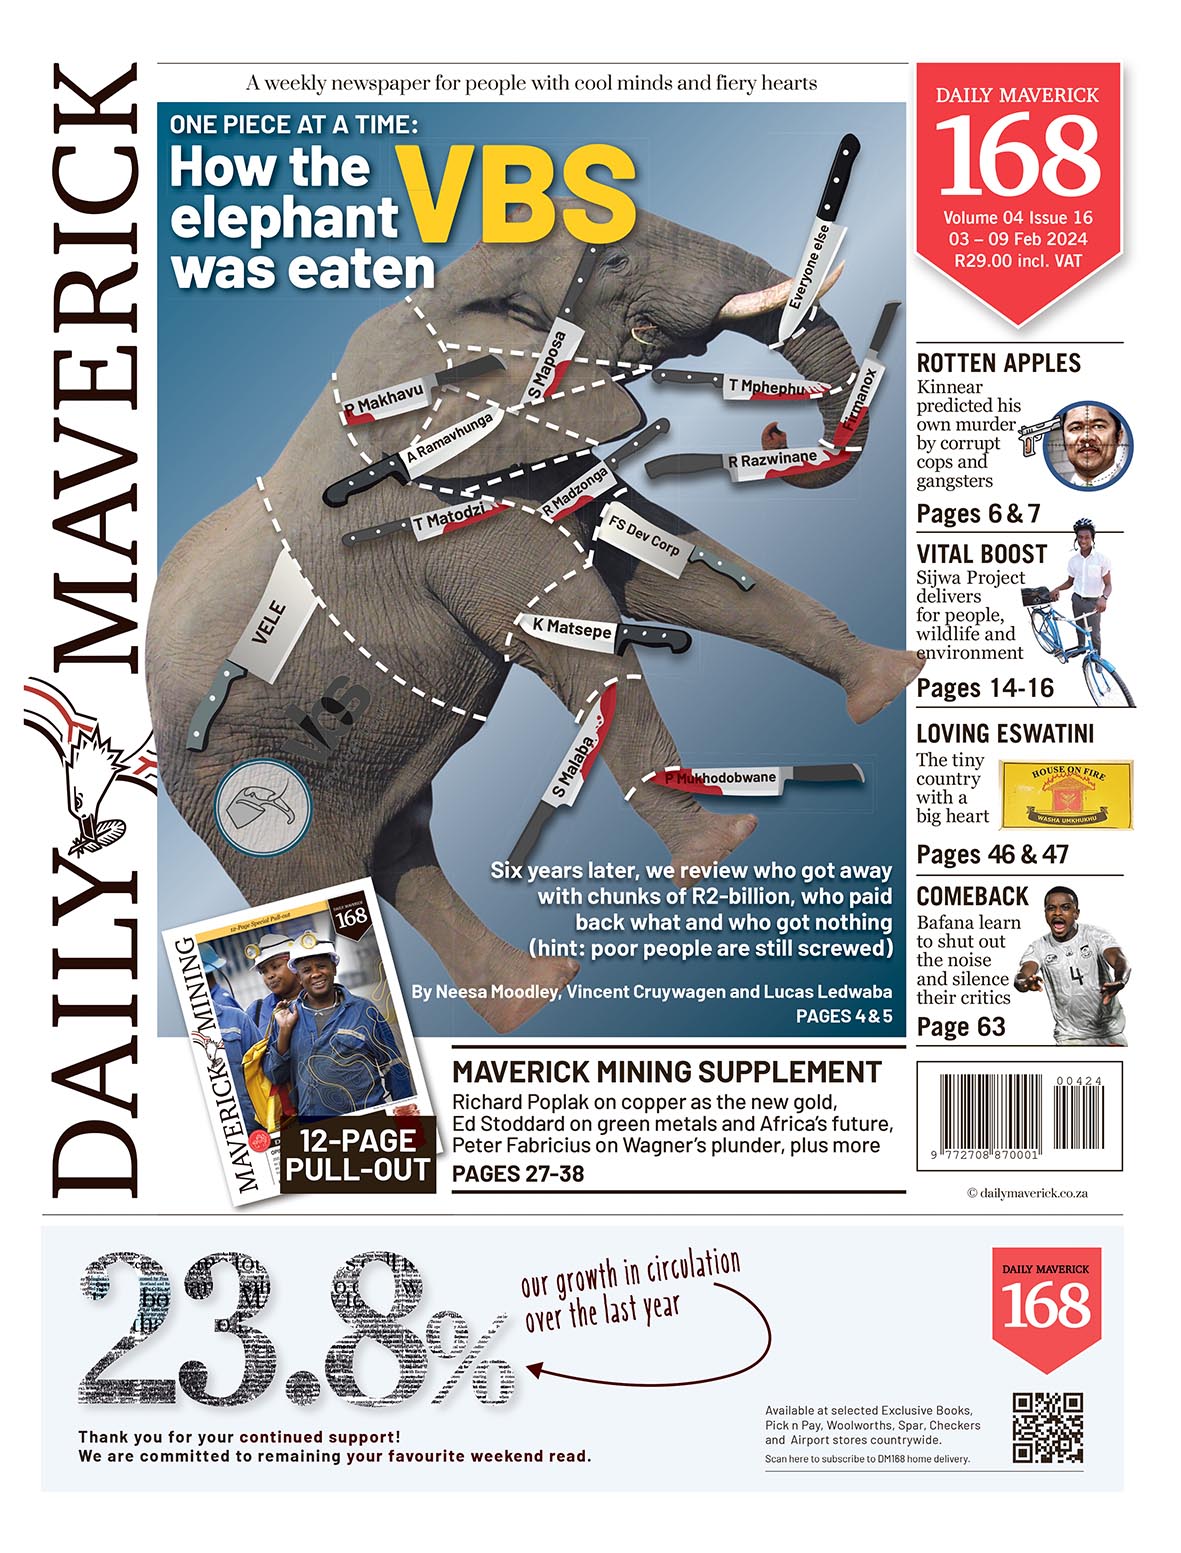 DM168 front page